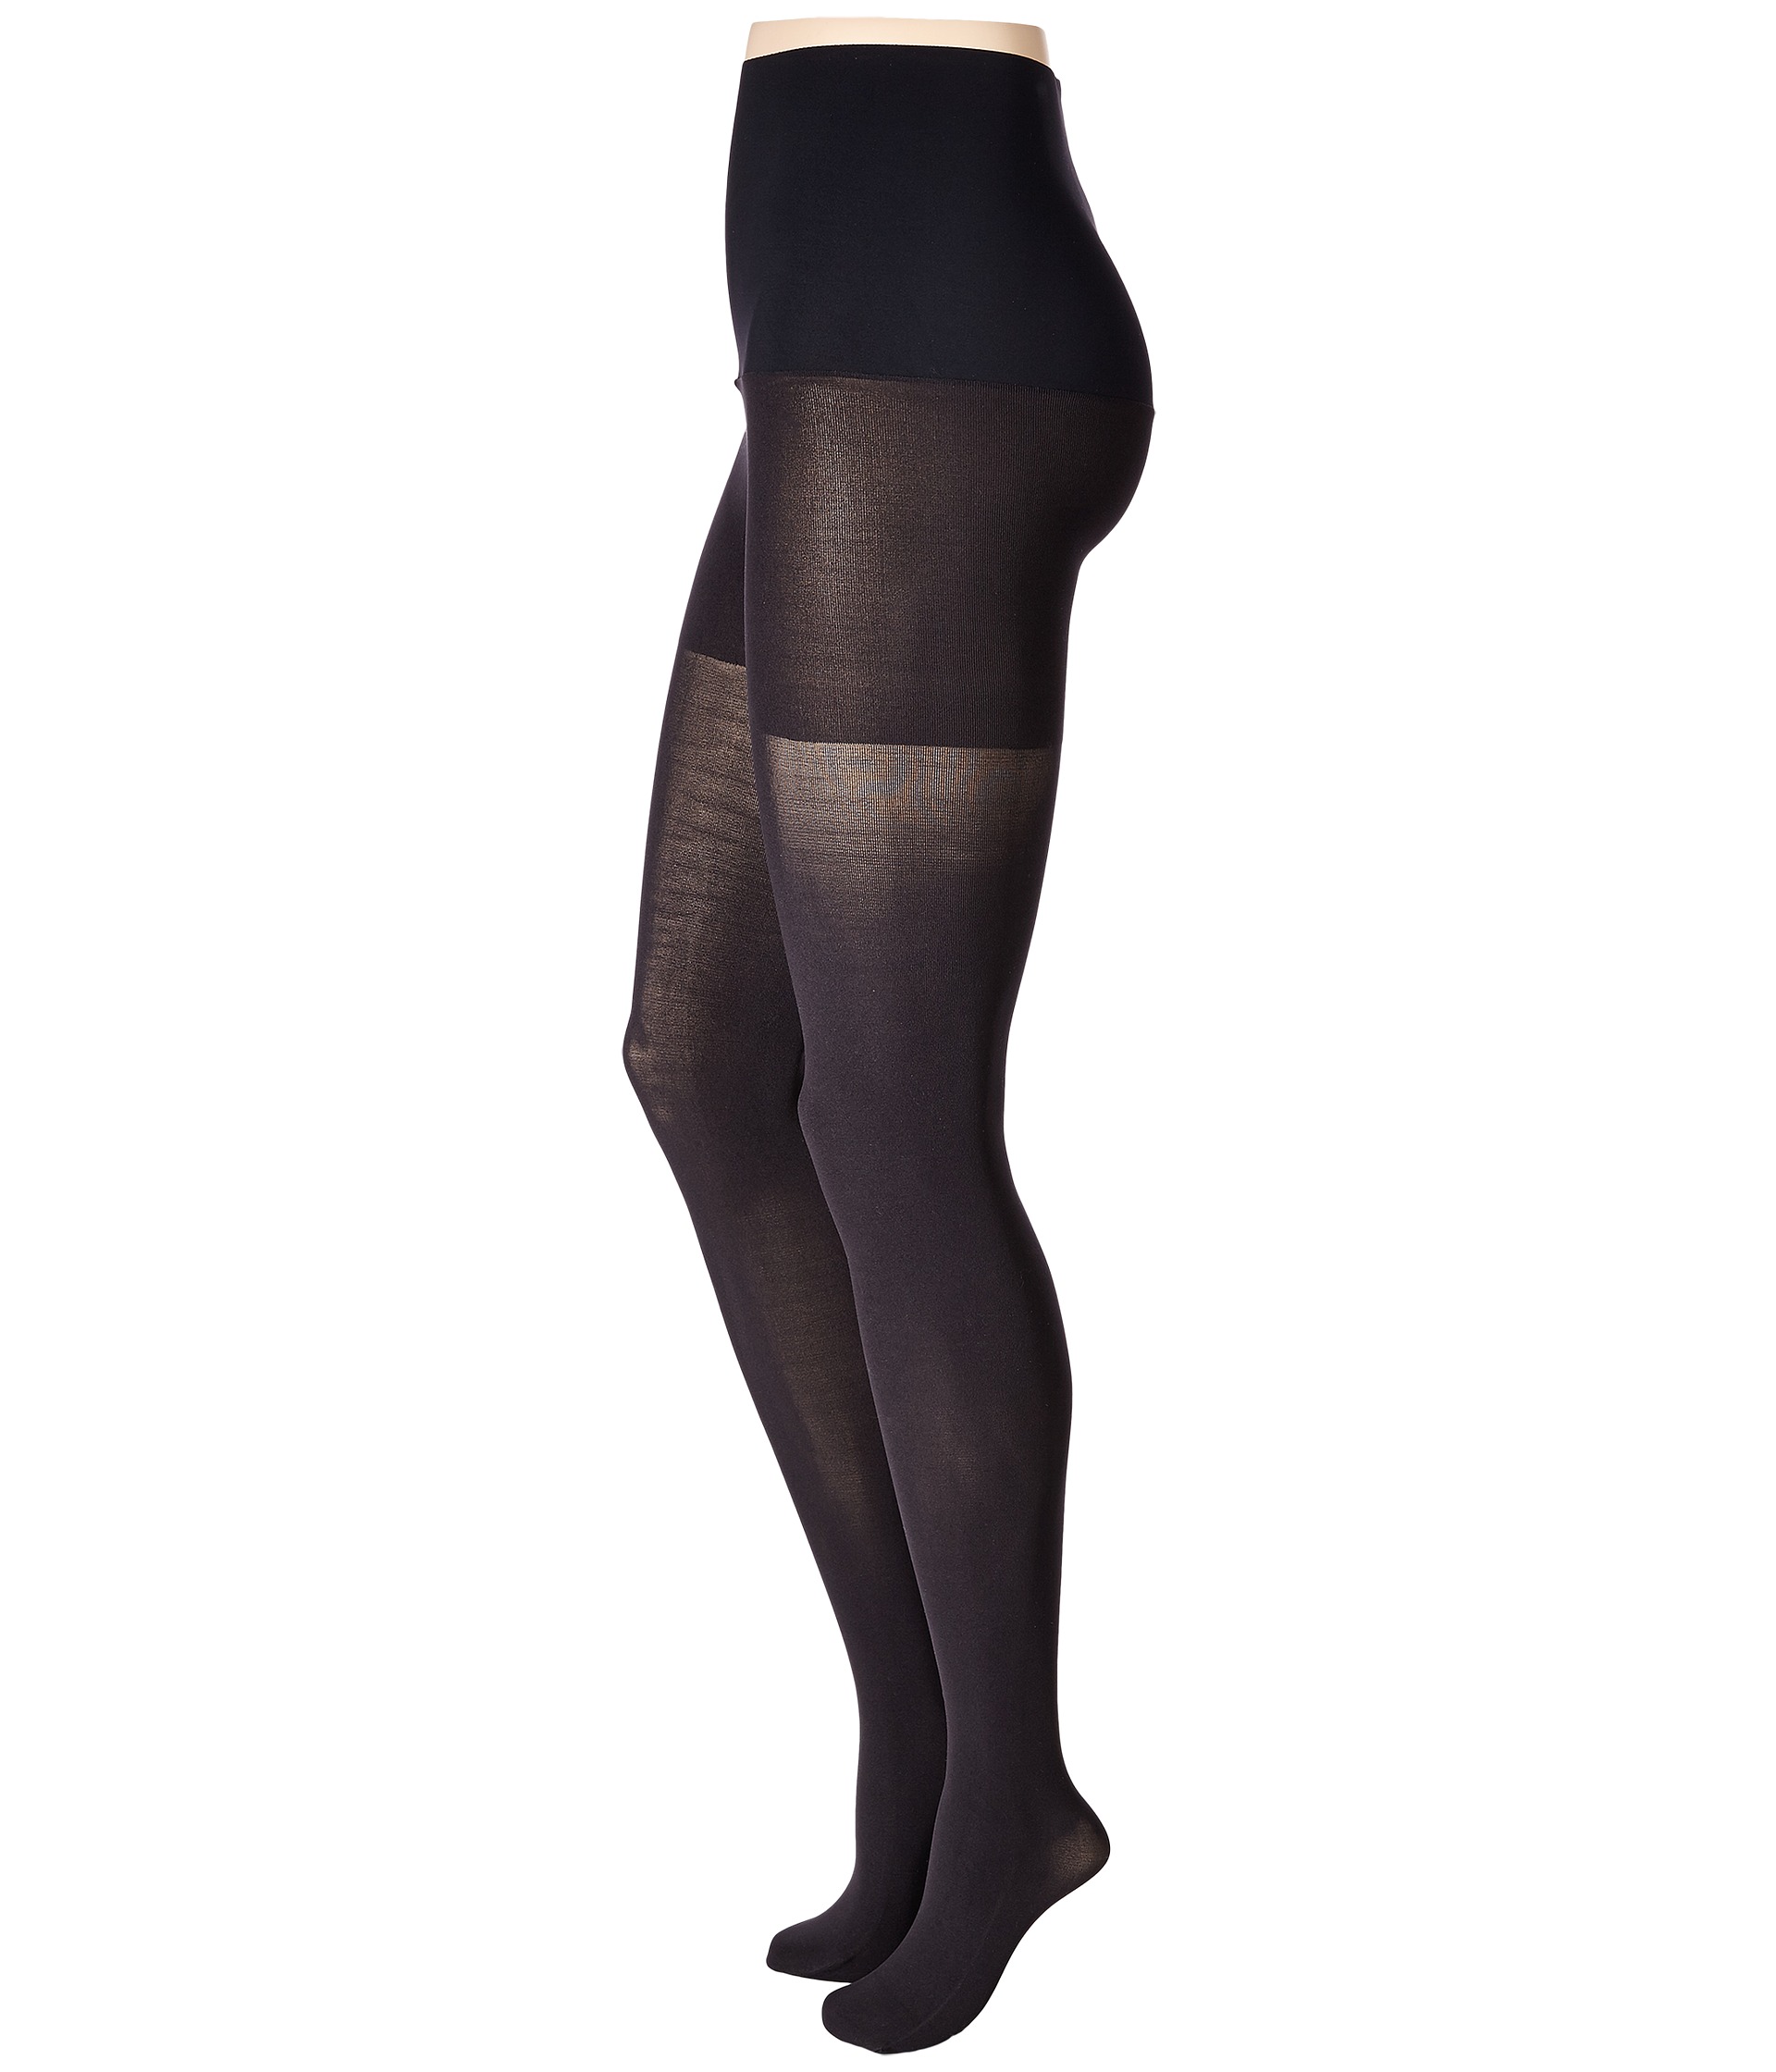 Commando Ultimate Opaque Tights in Control HC70T1 at Zappos.com